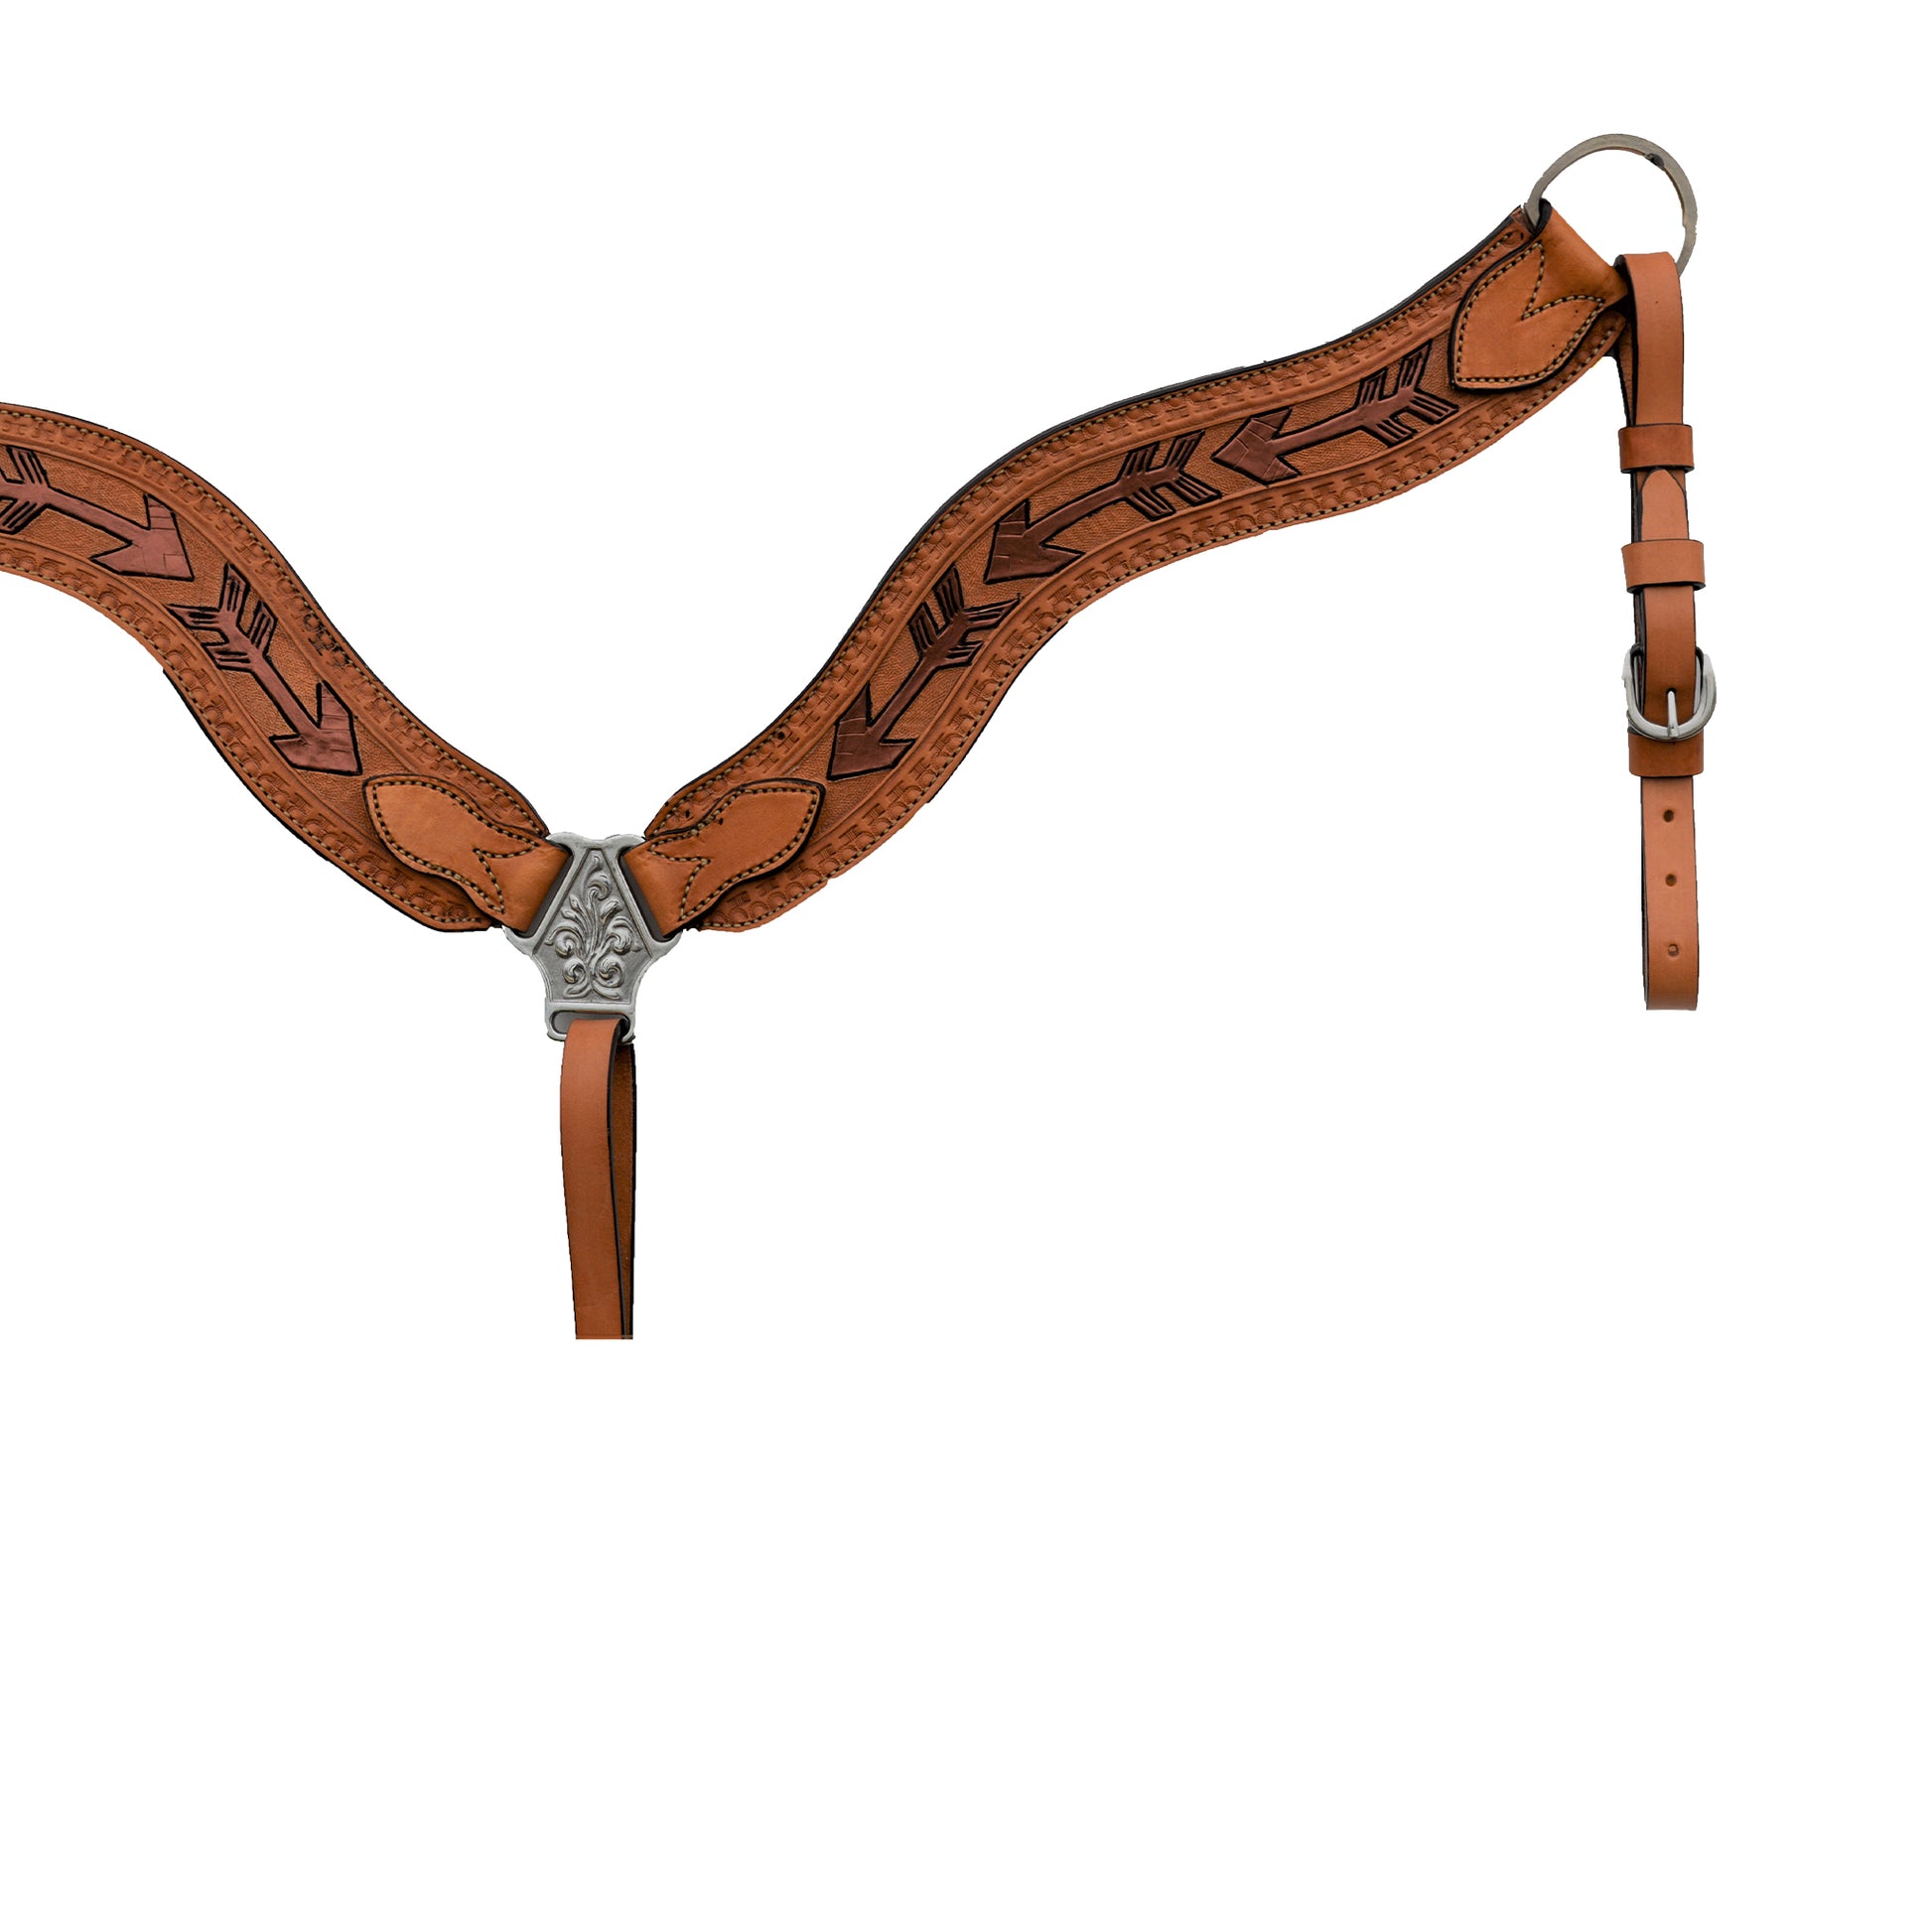 2-1/2" Wave breast collar golden leather geo/basket cross tooling with copper painted arrows.